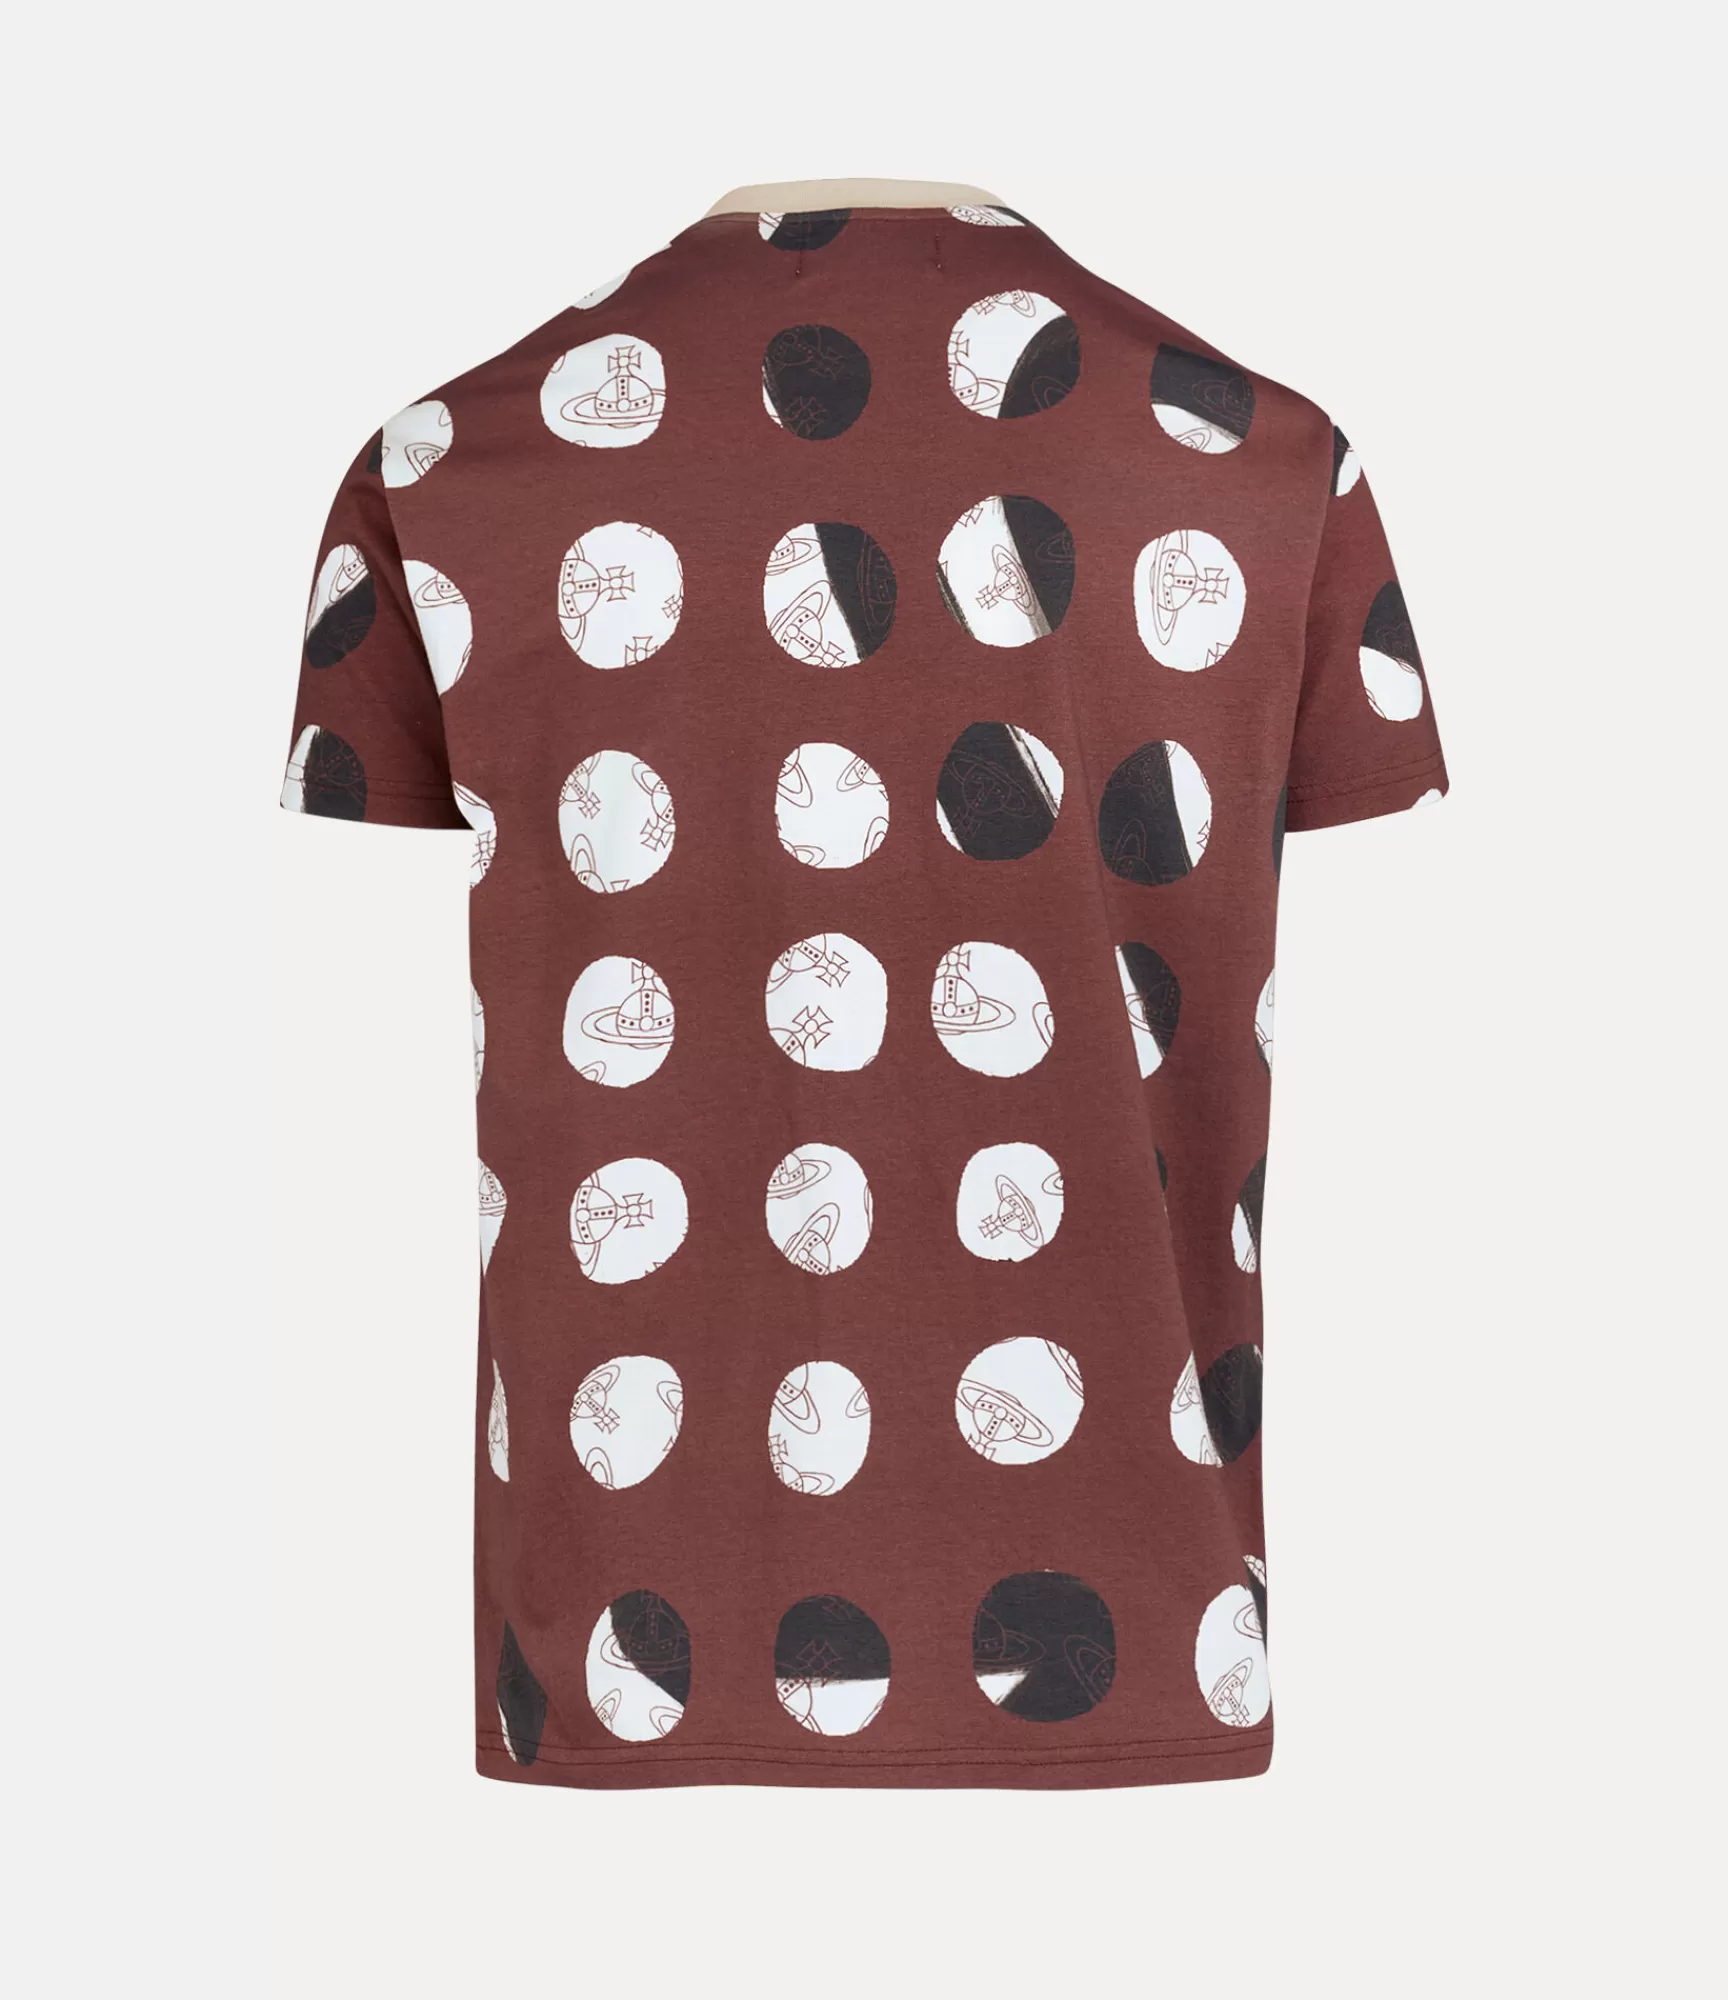 Vivienne Westwood T-Shirts and Polos | Sweatshirts and T-Shirts*Classic t-shirt Dots & Orbs